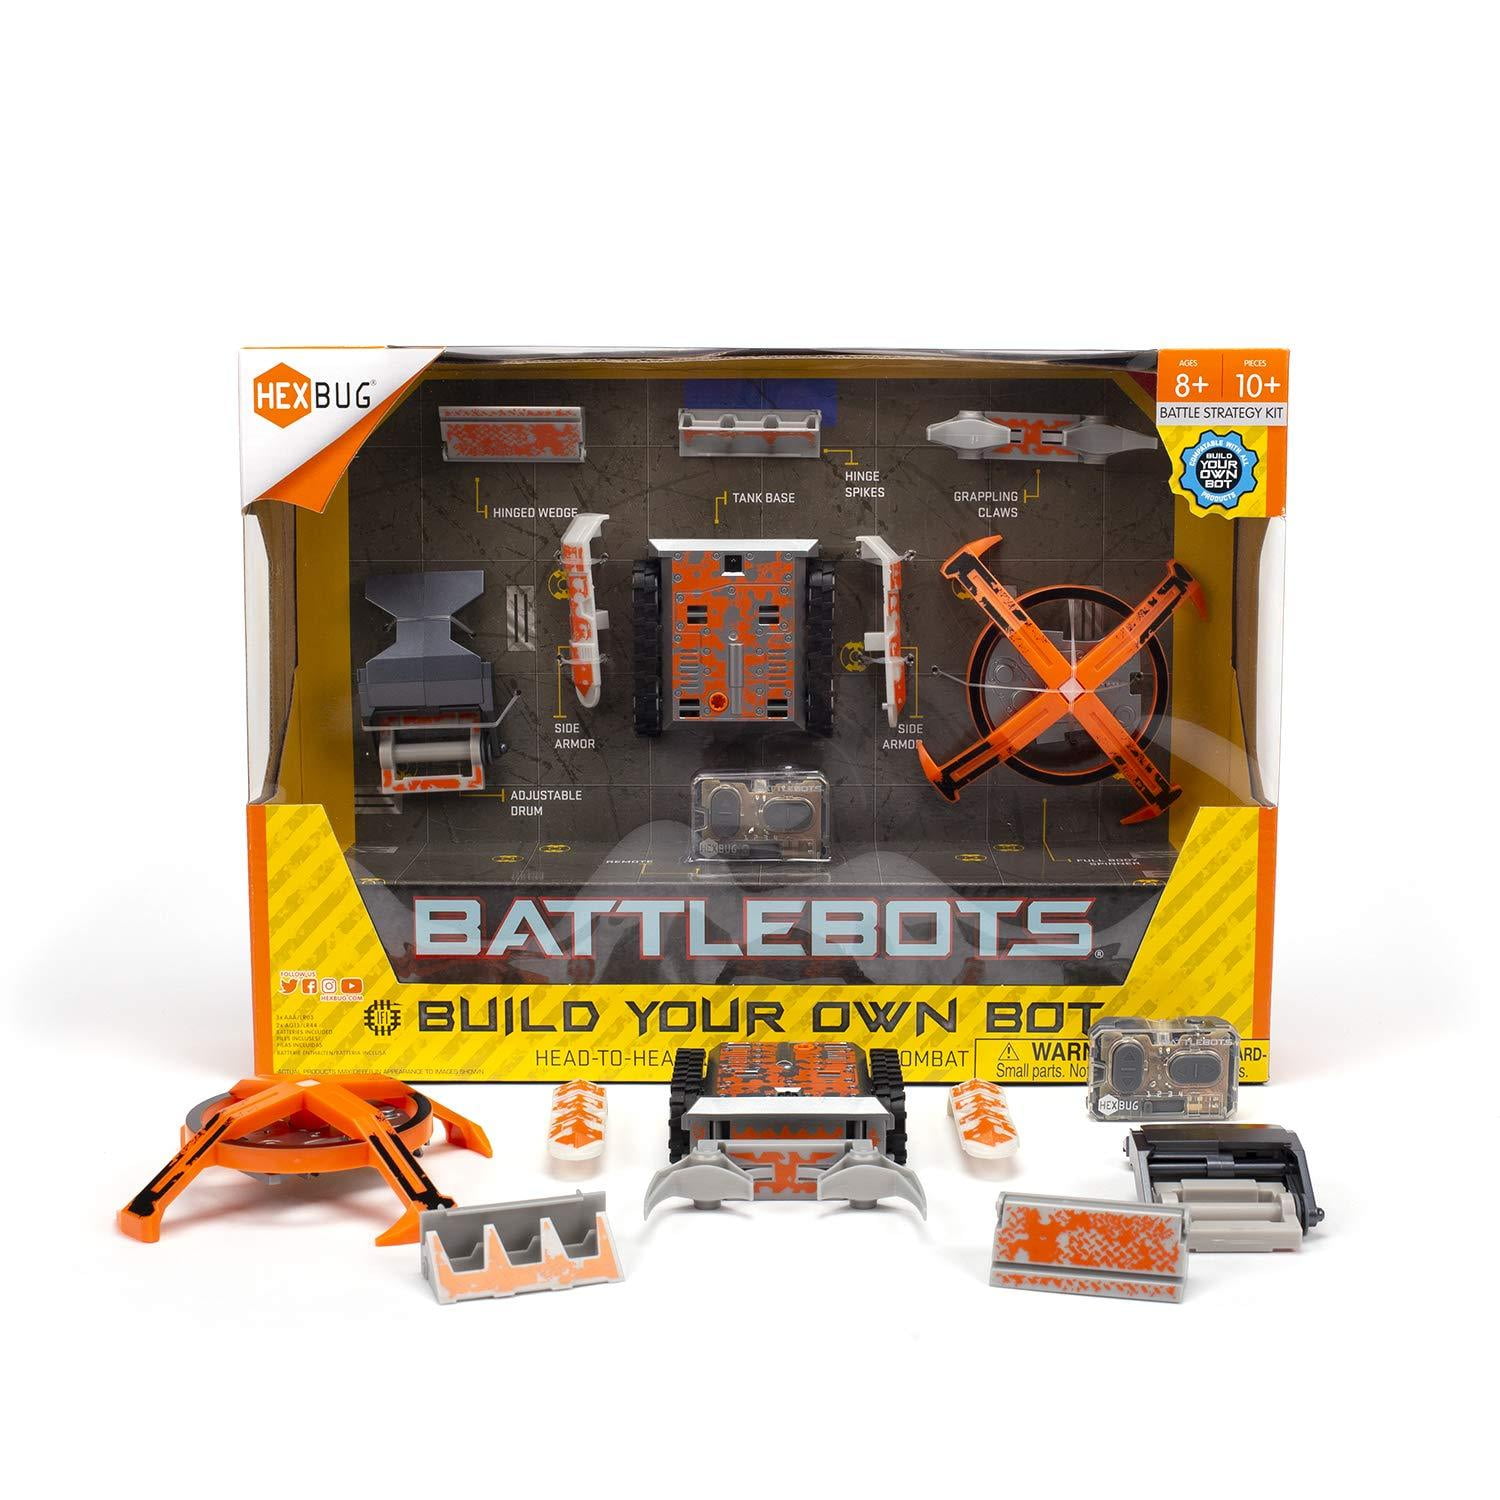 HEXBUG 4136179 BattleBots Rivals Bronco and Witch Doctor Strategy Kit for sale online 